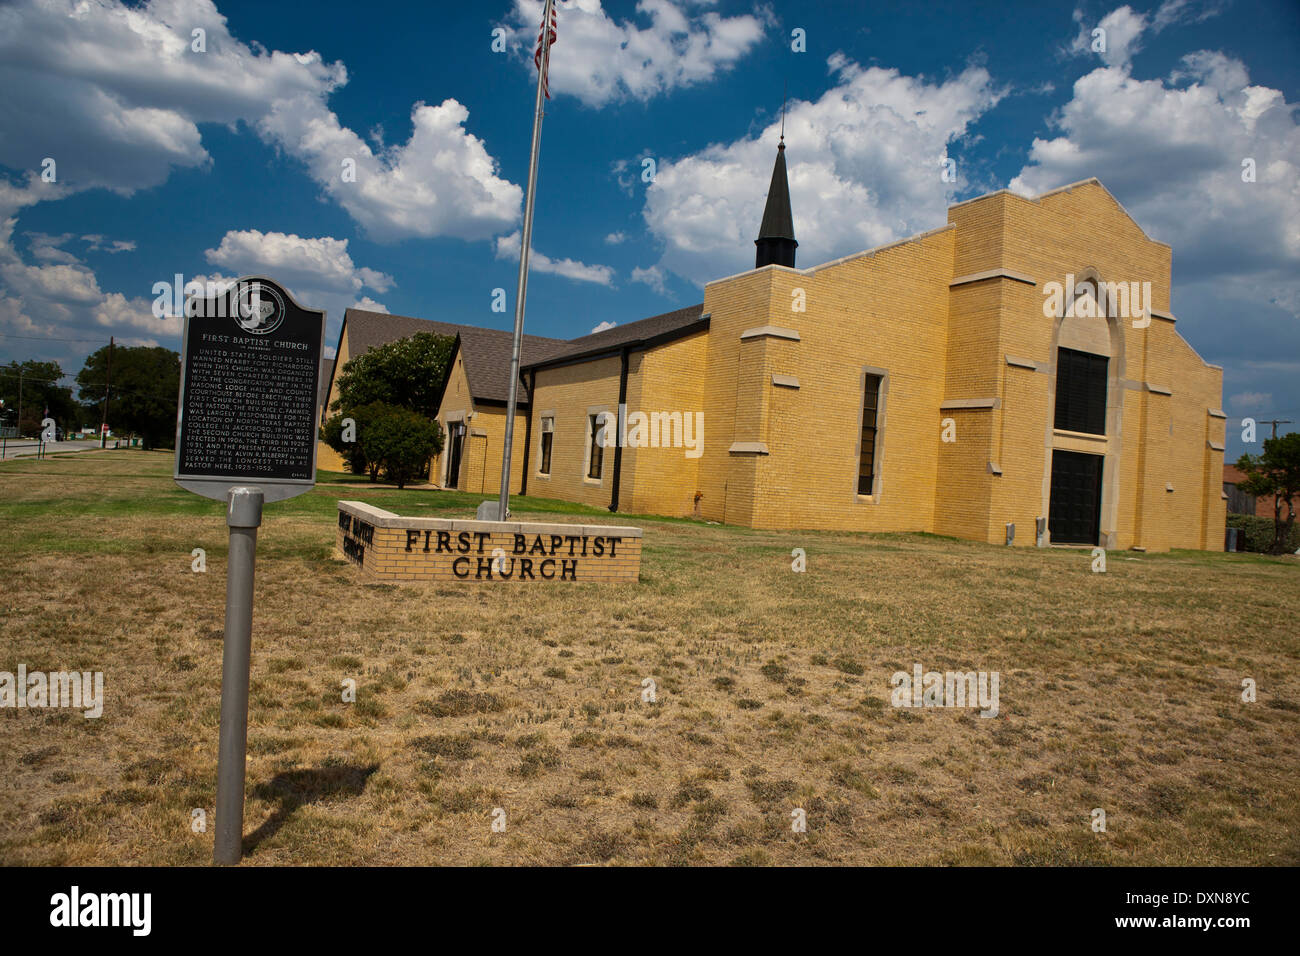 First Baptist Church, Ponca City, Texas, United States of America Banque D'Images